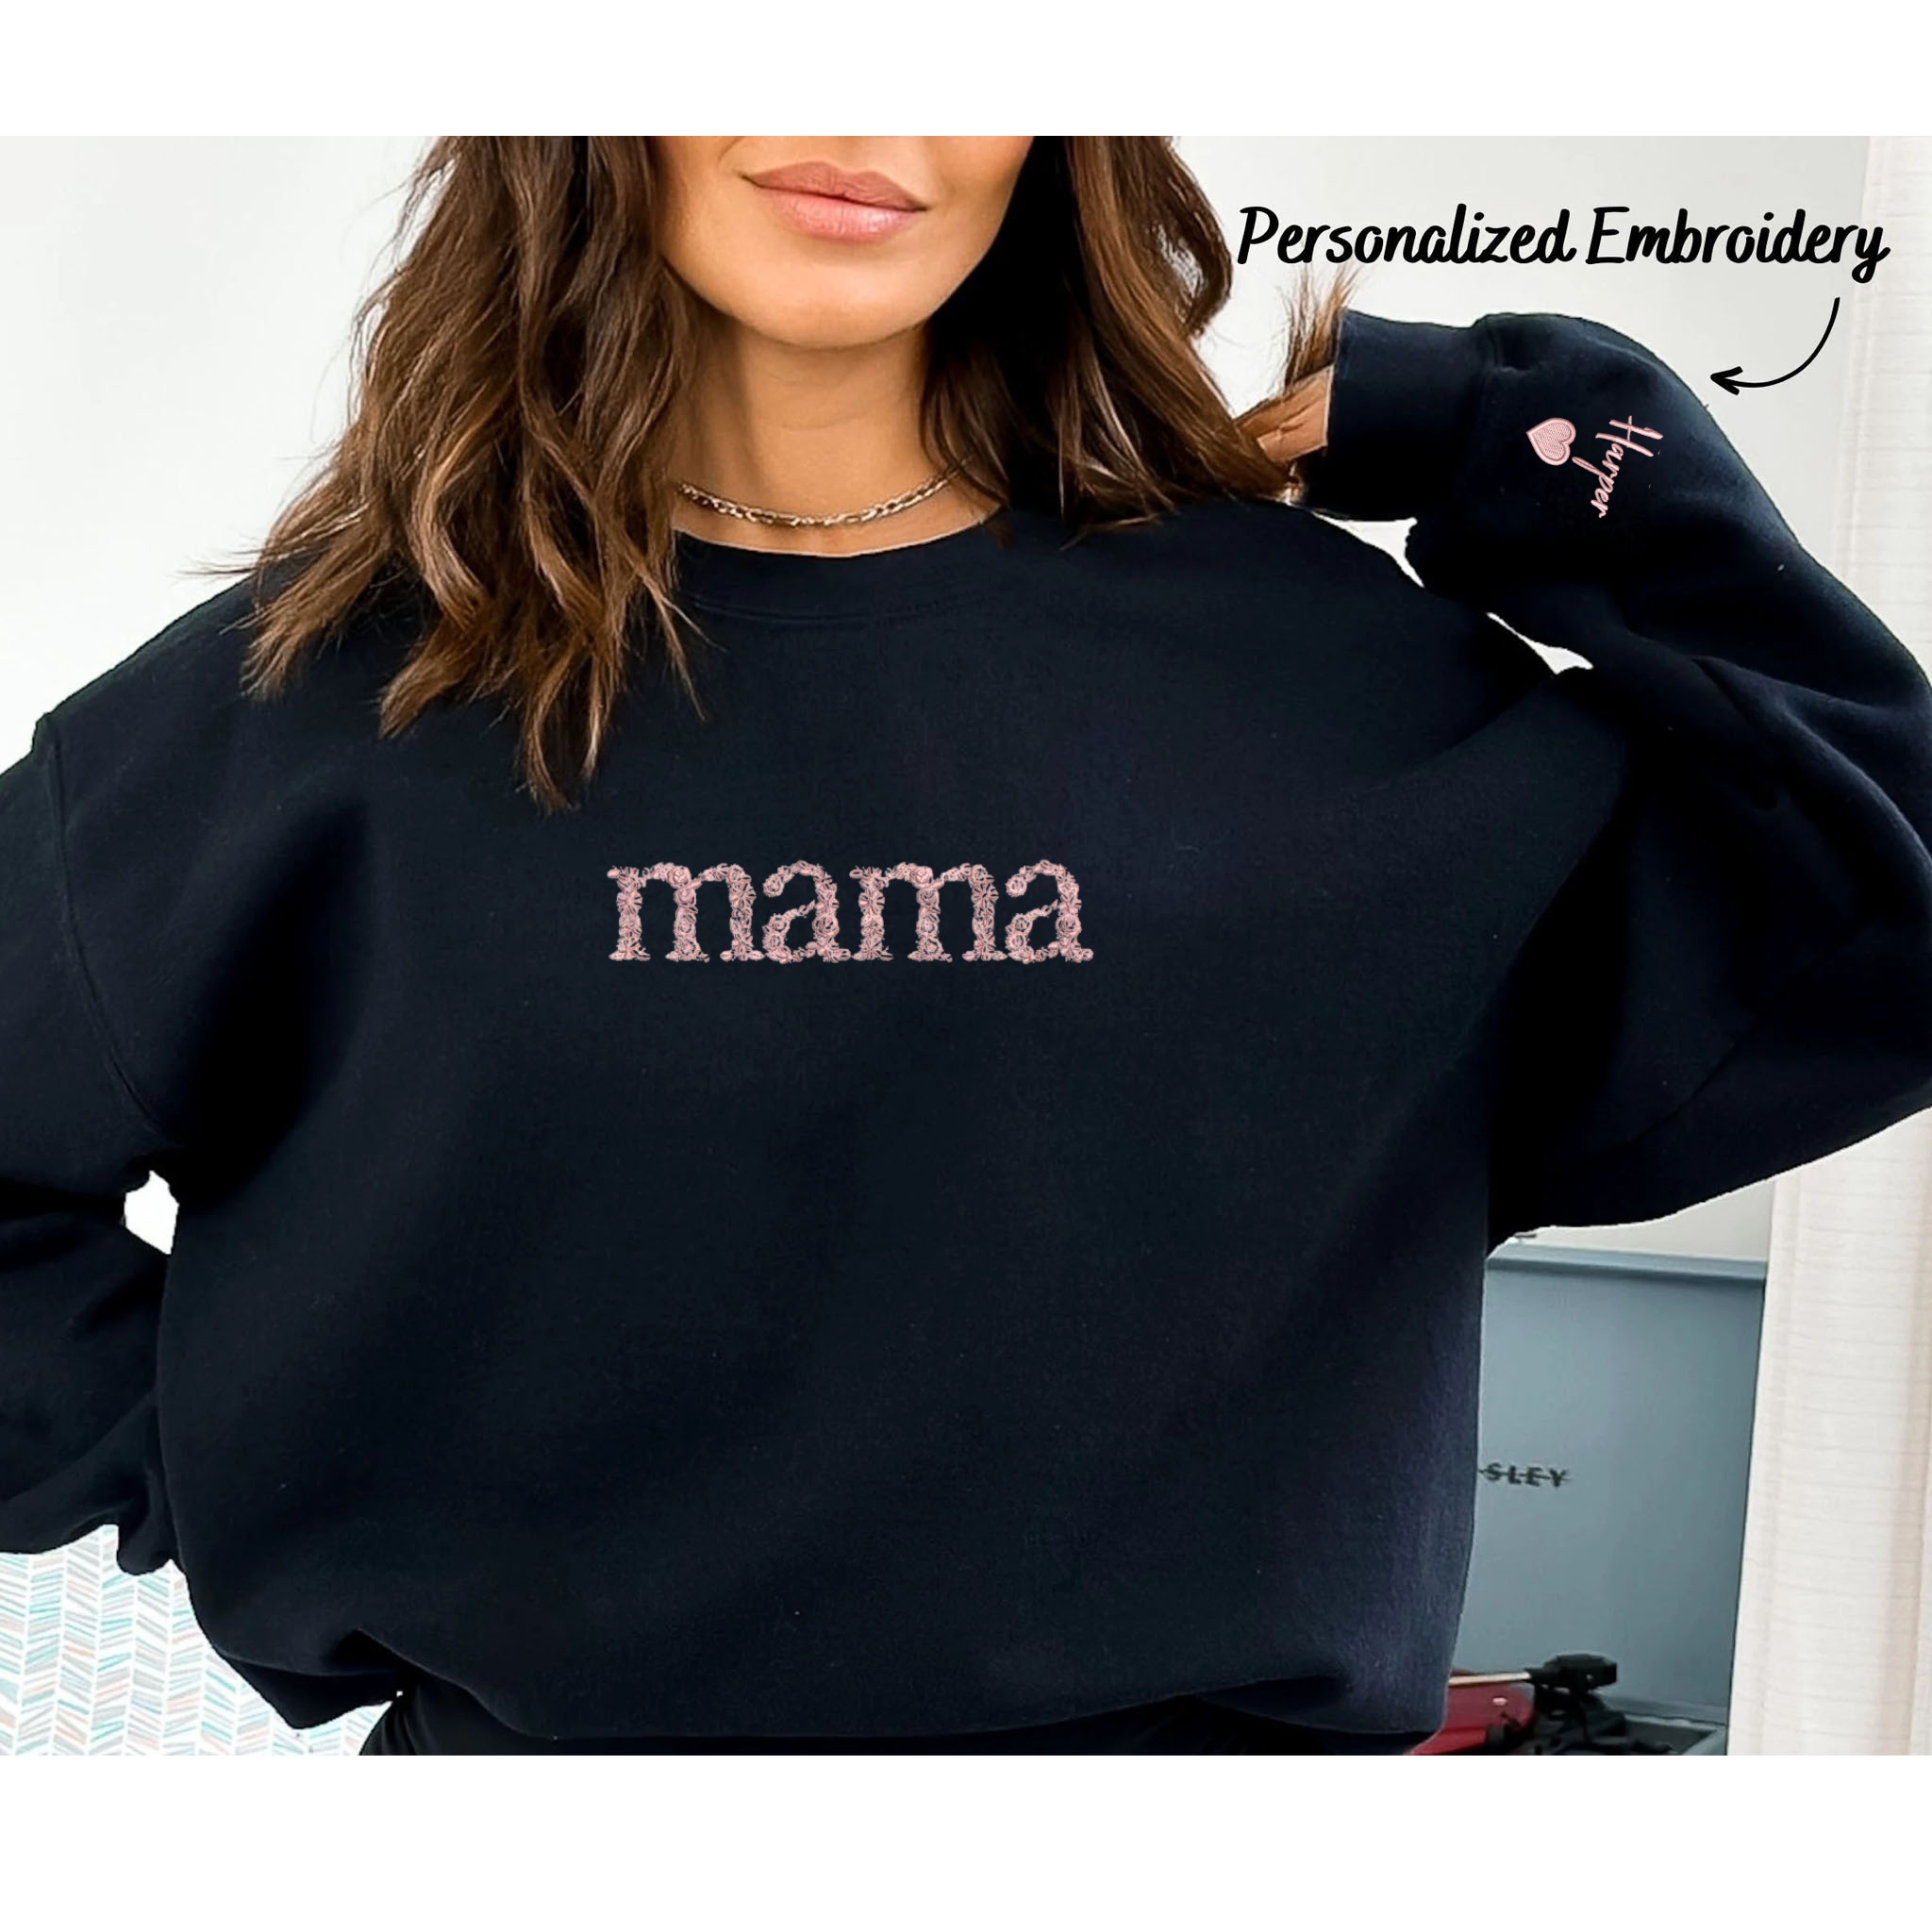 I Wear My Heart on My Sleeve, Personalized Grandma Shirt with Kids Names (Up to 5 Names), Custom Floral Letter Embroidered Sweatshirt, Gifts for Mom